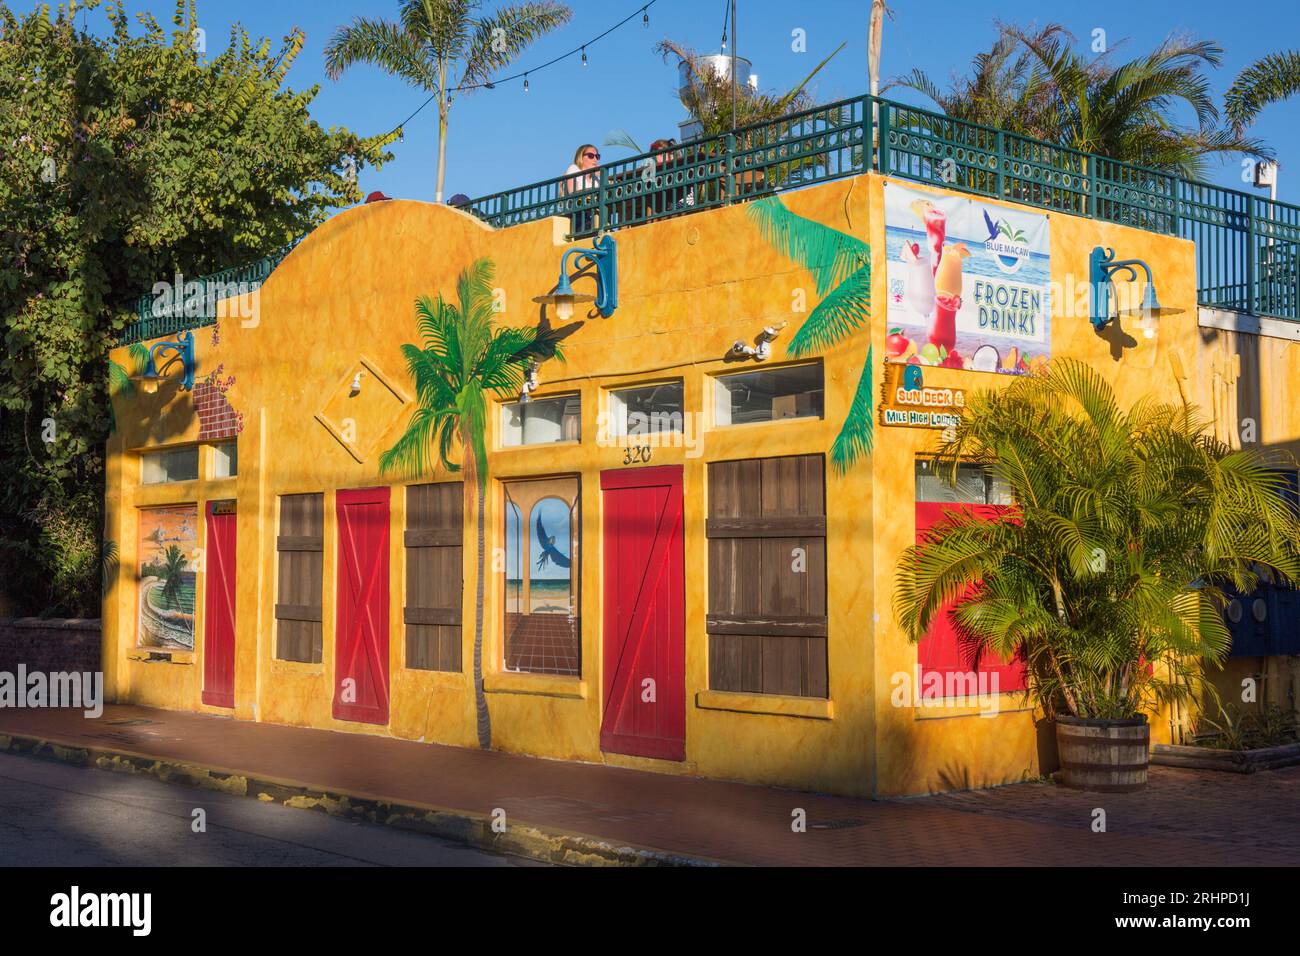 Key West, Florida, USA. The Blue Macaw, a popular cocktail bar with rooftop terrace, sunset, Bahama Village, Old Town. Stock Photo